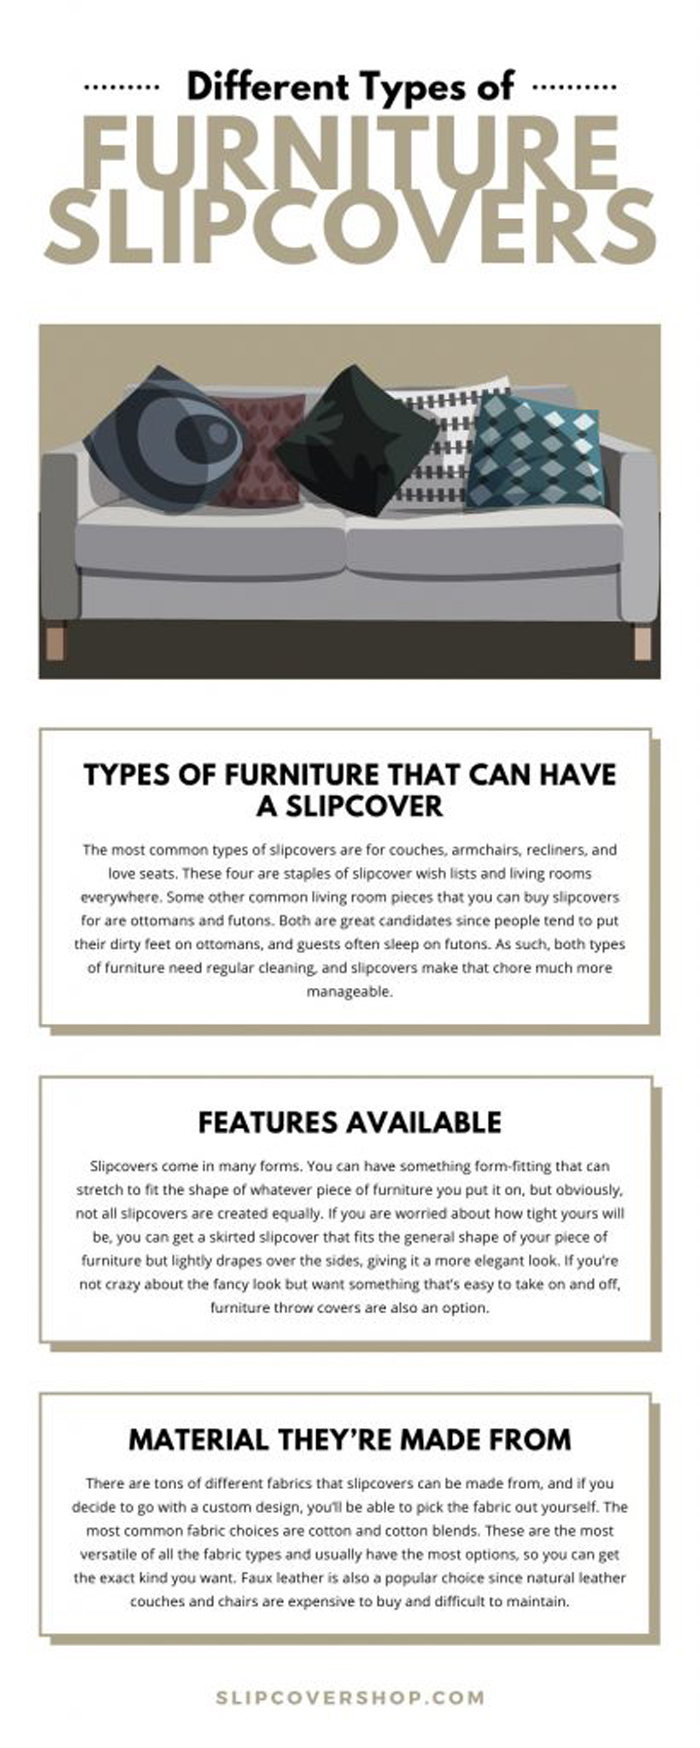 Different Types of Furniture Slipcovers